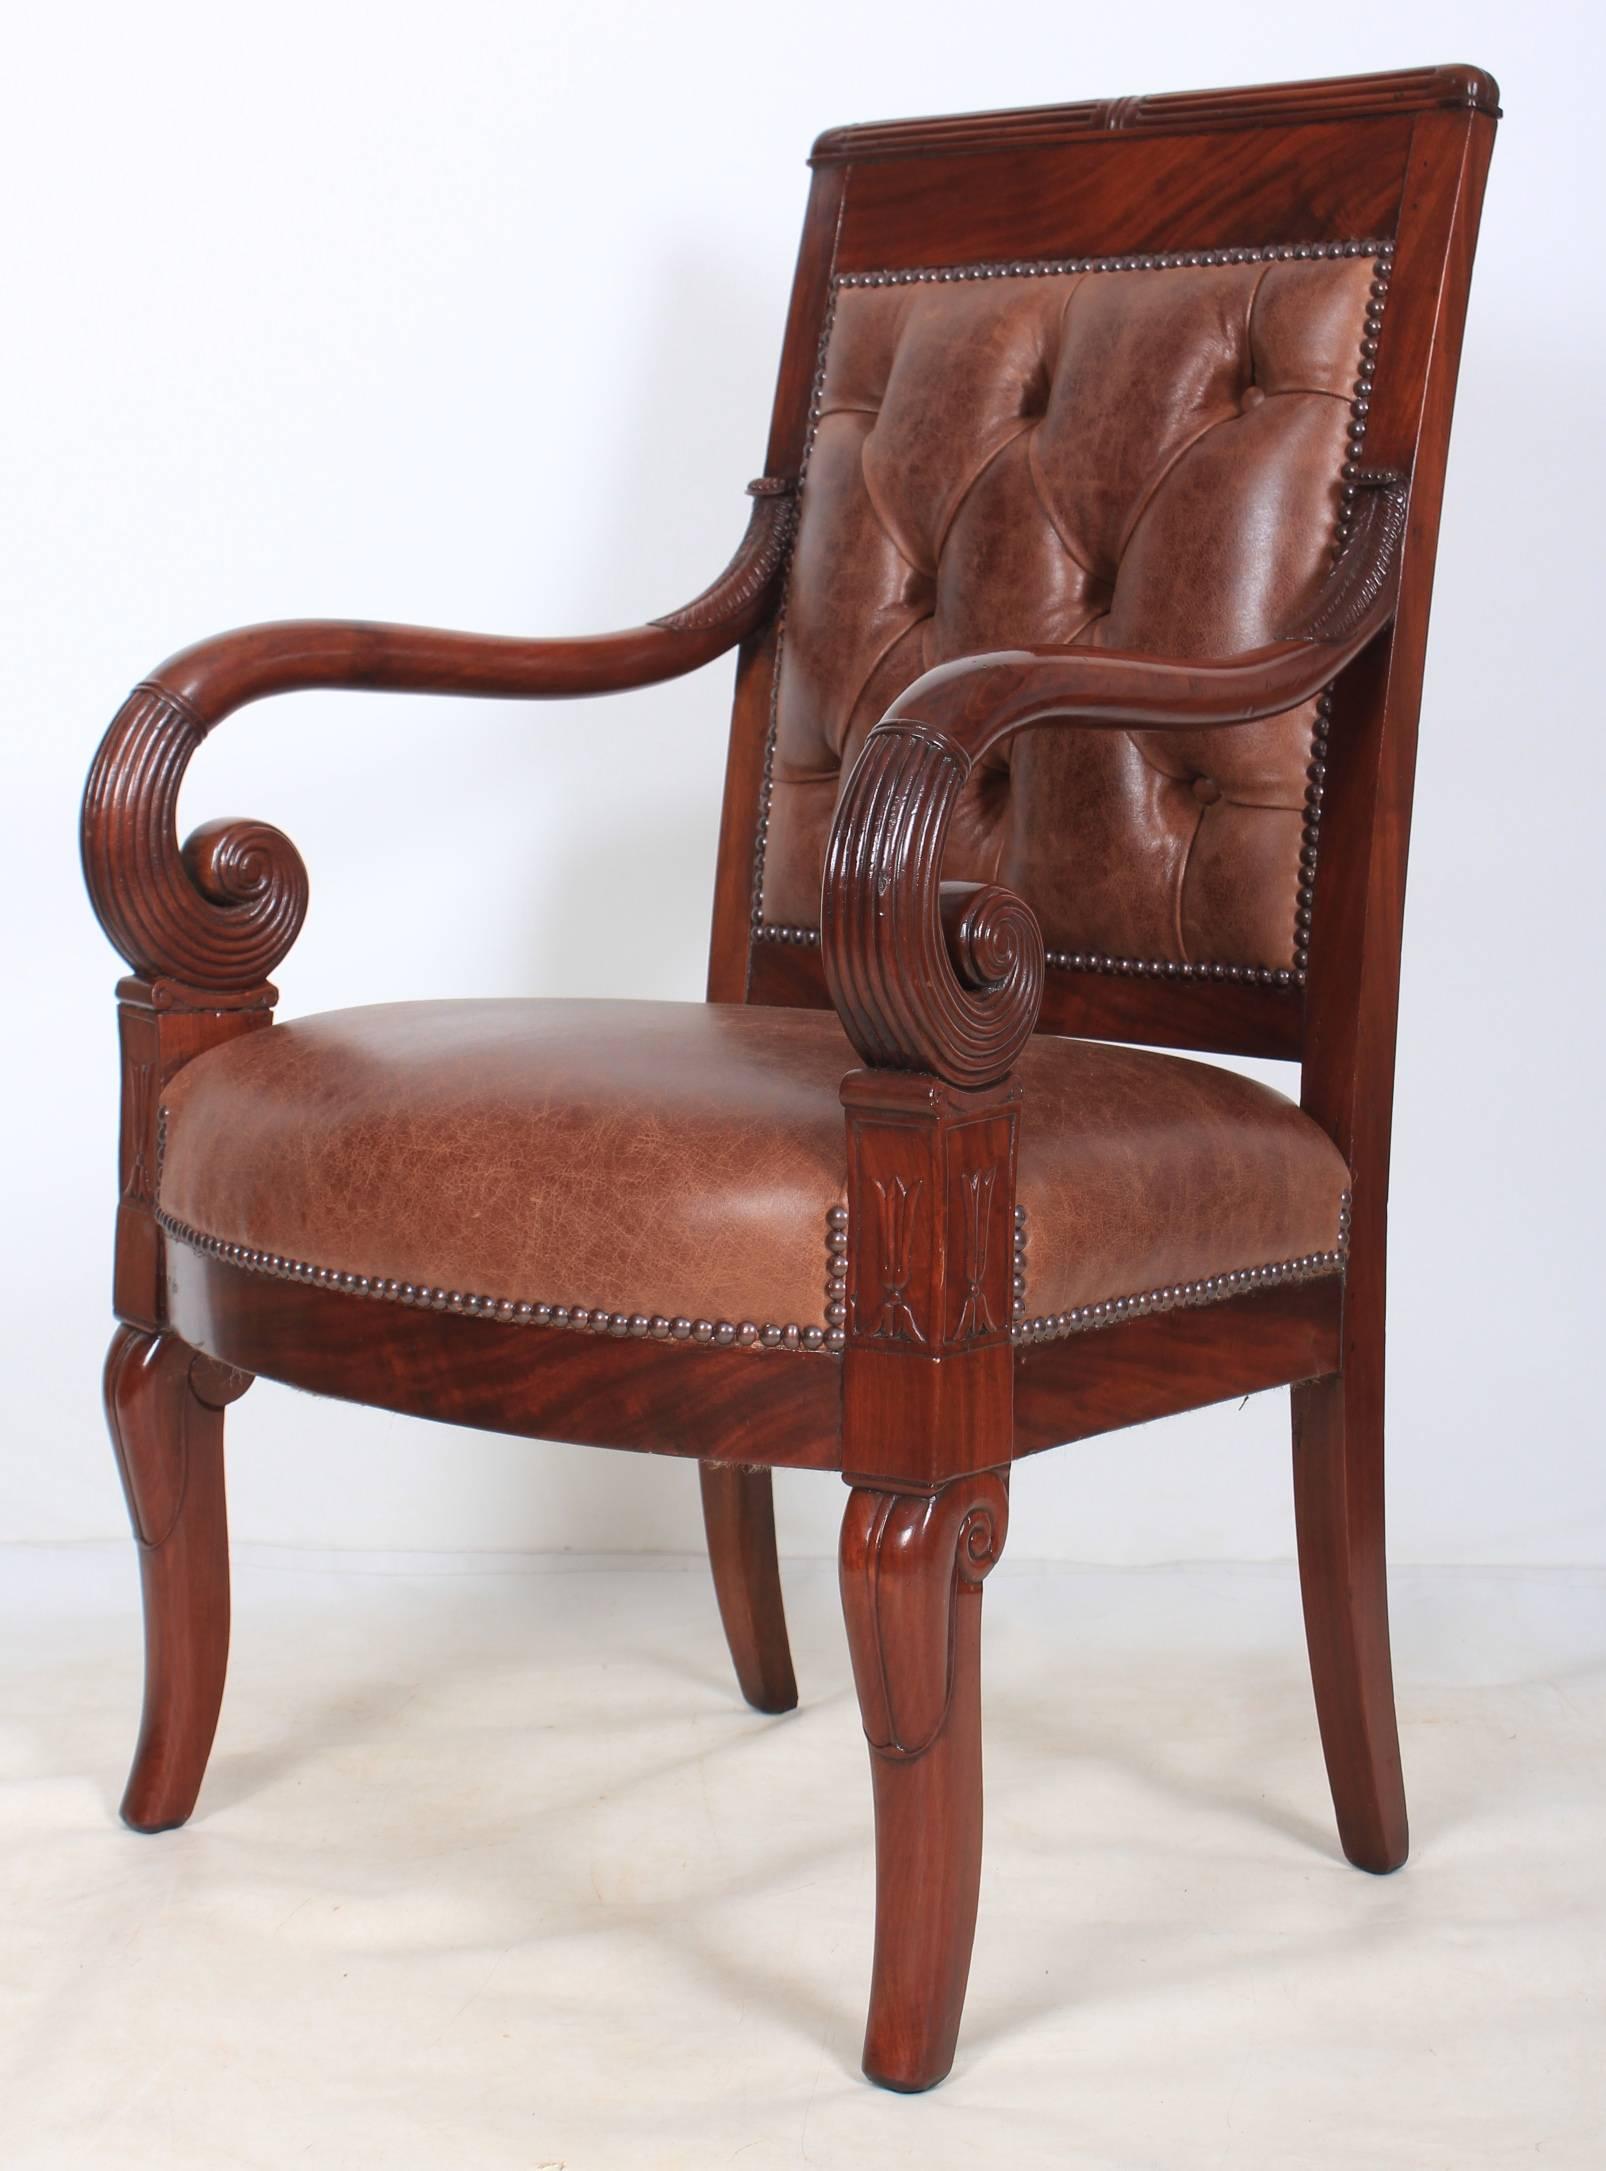 Mid-19th Century Pair of French Empire Style Mahogany and Leather Library Chairs For Sale